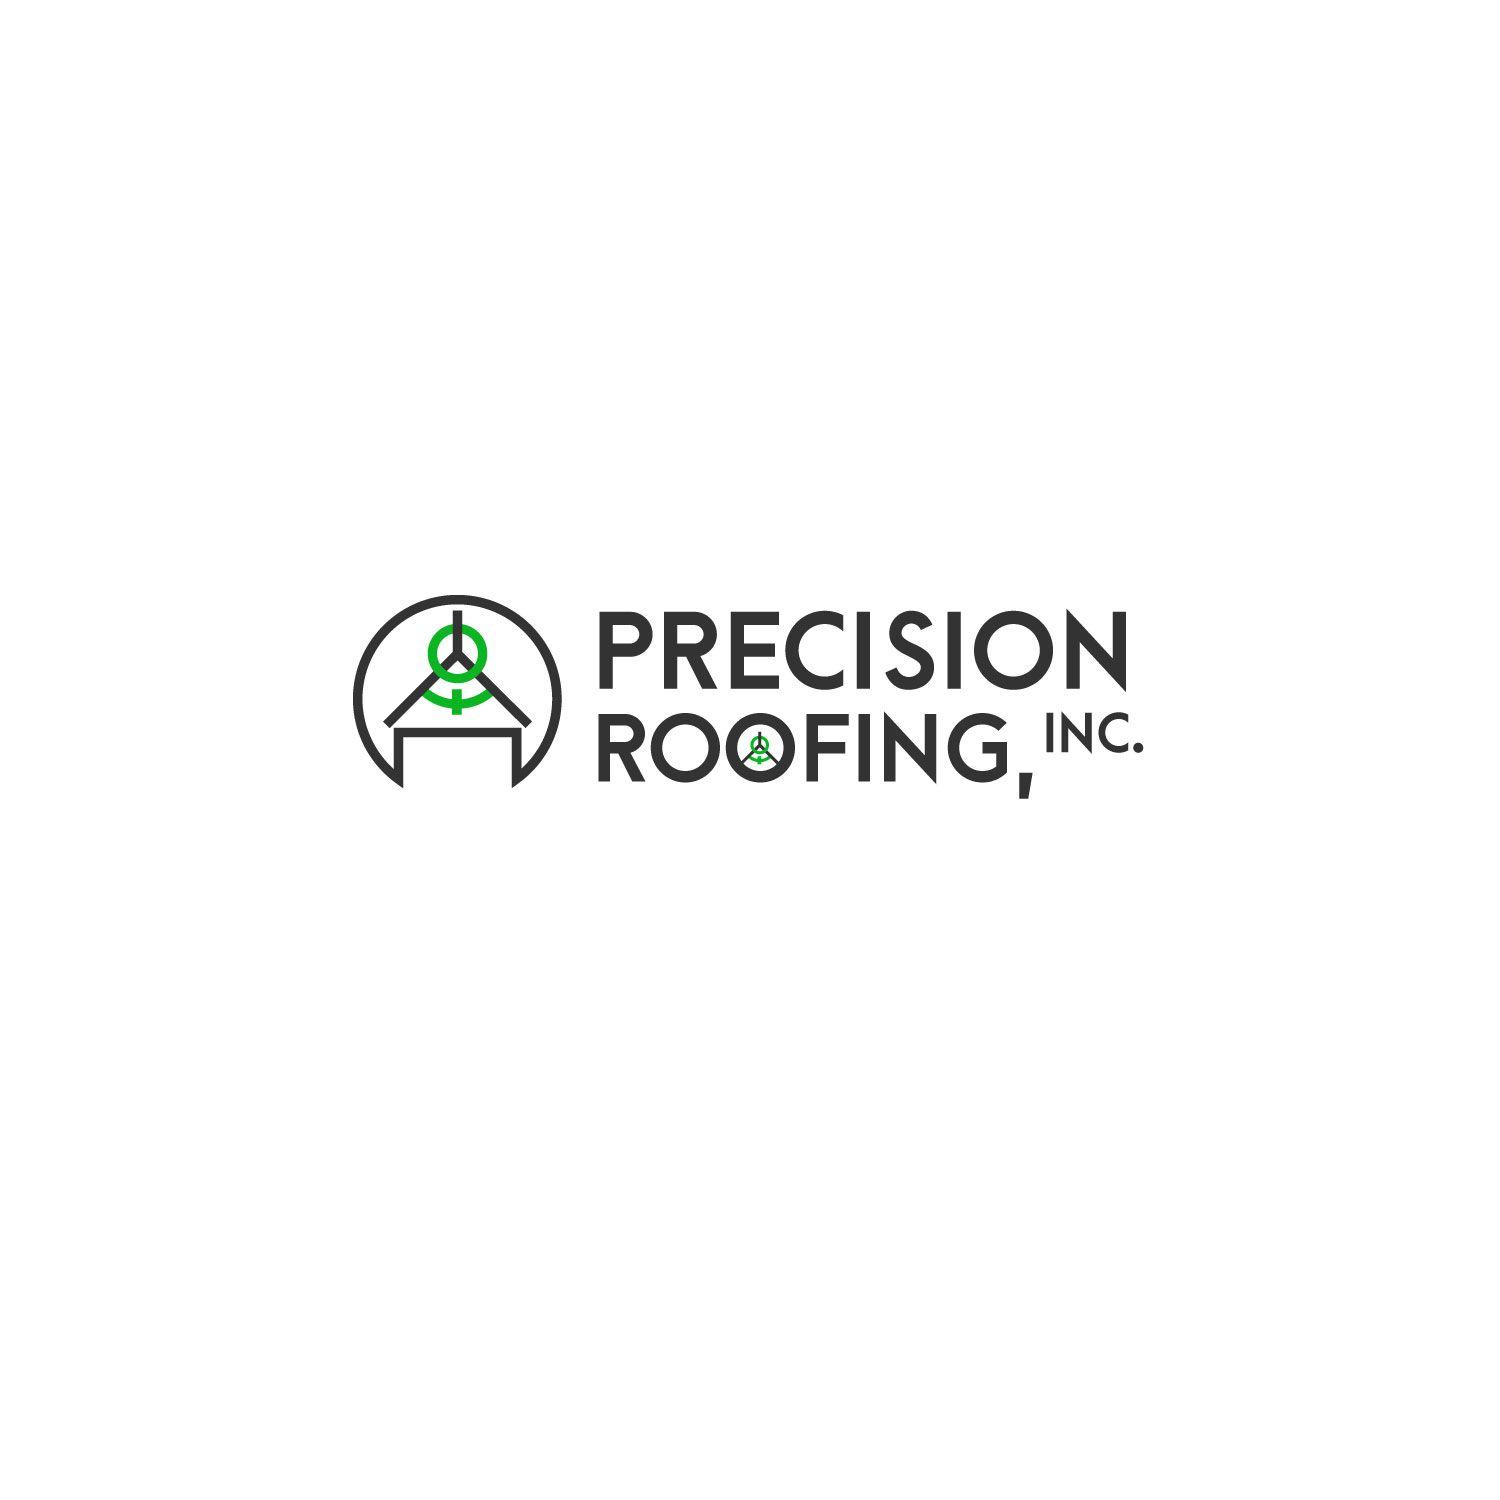 Precision Logo - Modern, Professional, Roofing Logo Design for Precision Roofing, Inc